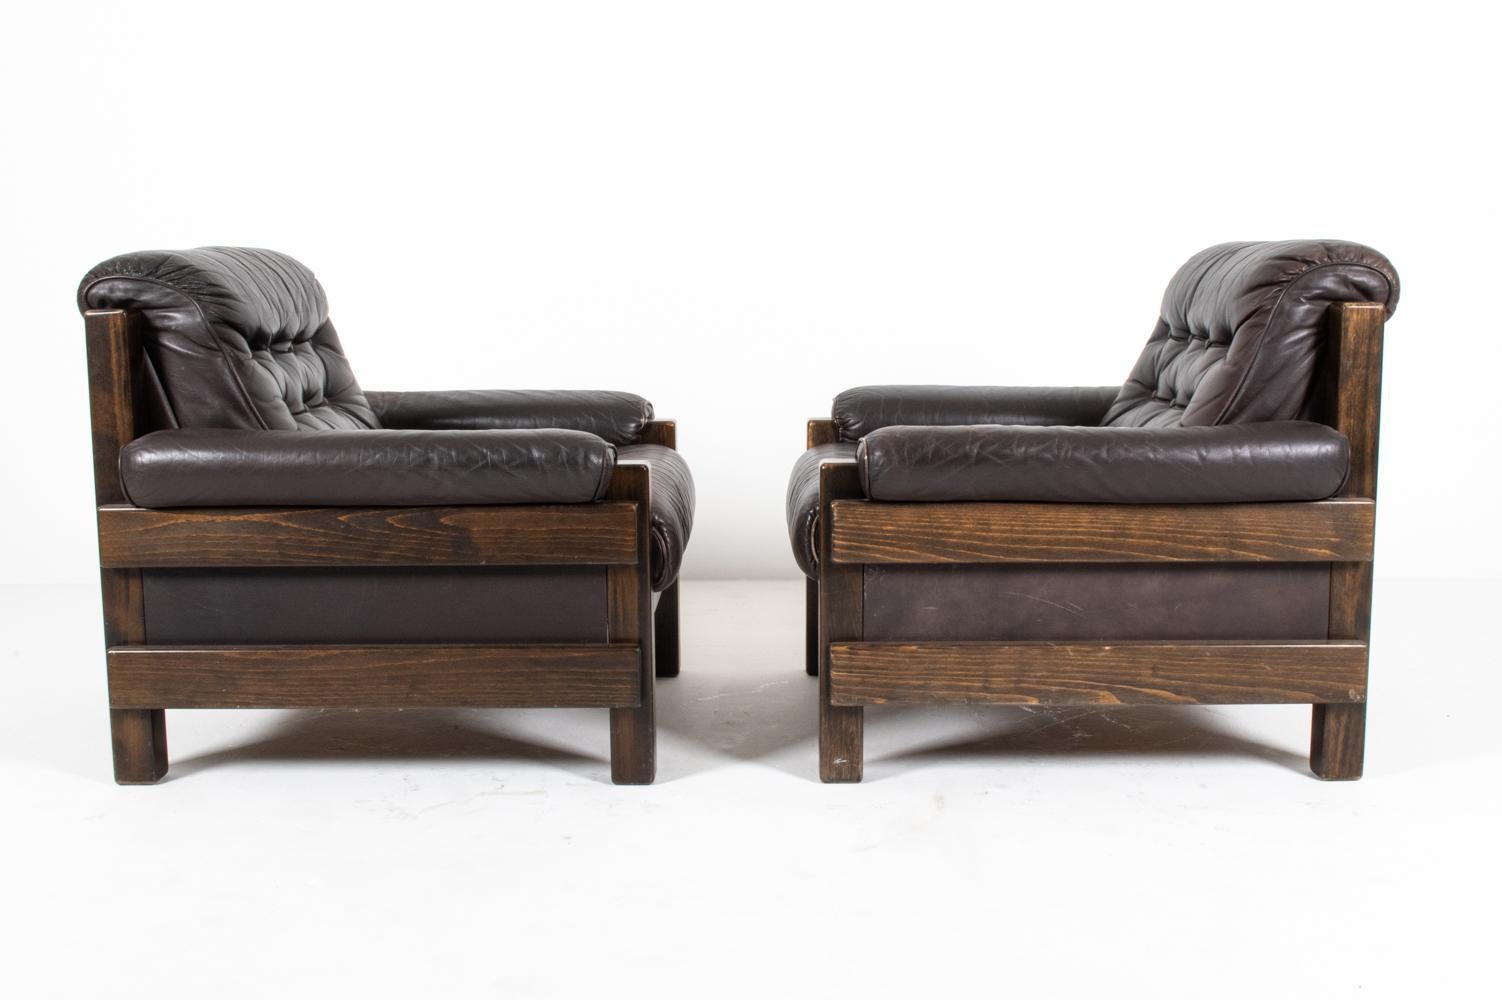 Pair of Swedish Mid-Century Tufted Leather Lounge Chairs by Ikea, 1970's For Sale 8